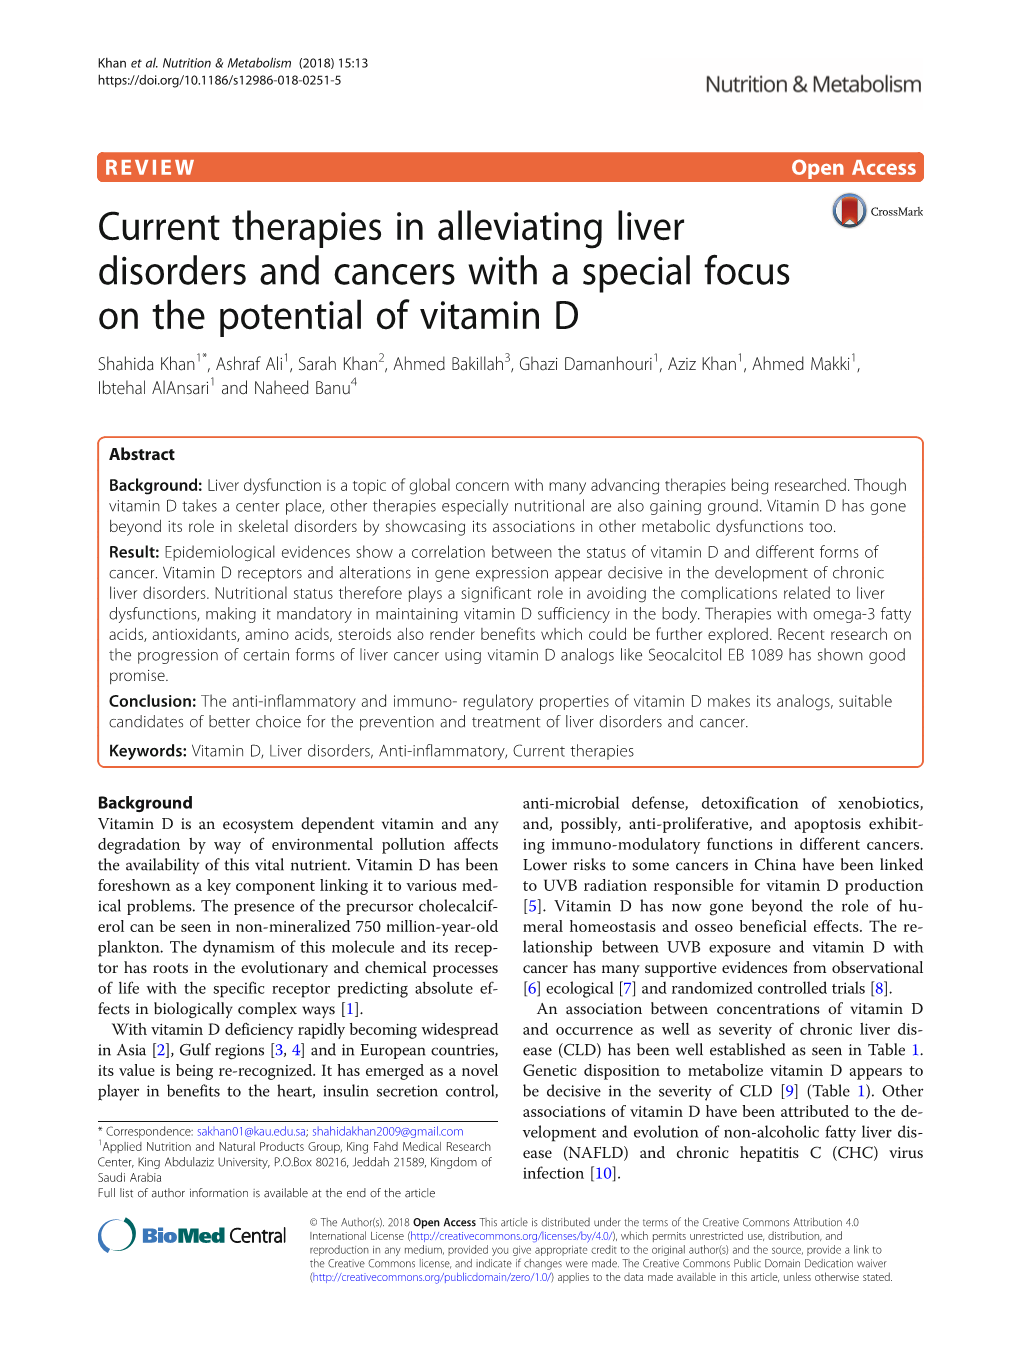 Liver, Cancer, and Vitamin D.Pdf